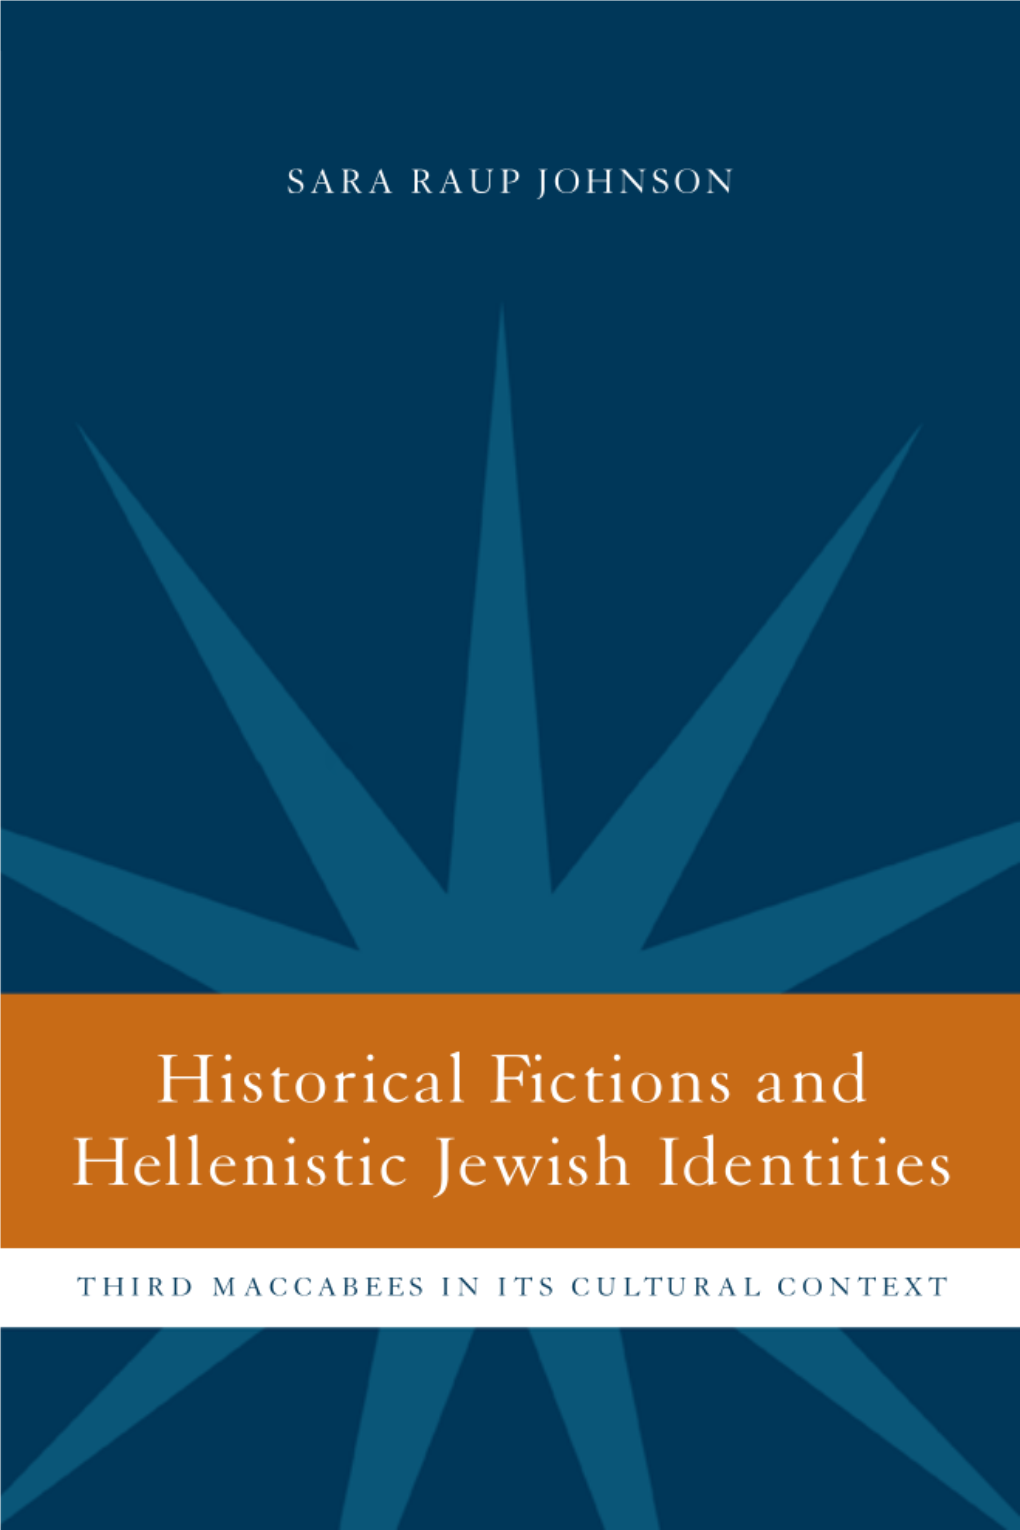 Historical Fictions and Hellenistic Jewish Identity: Third Maccabees in Its Cultural Context, by Sara Raup Johnson XLIV